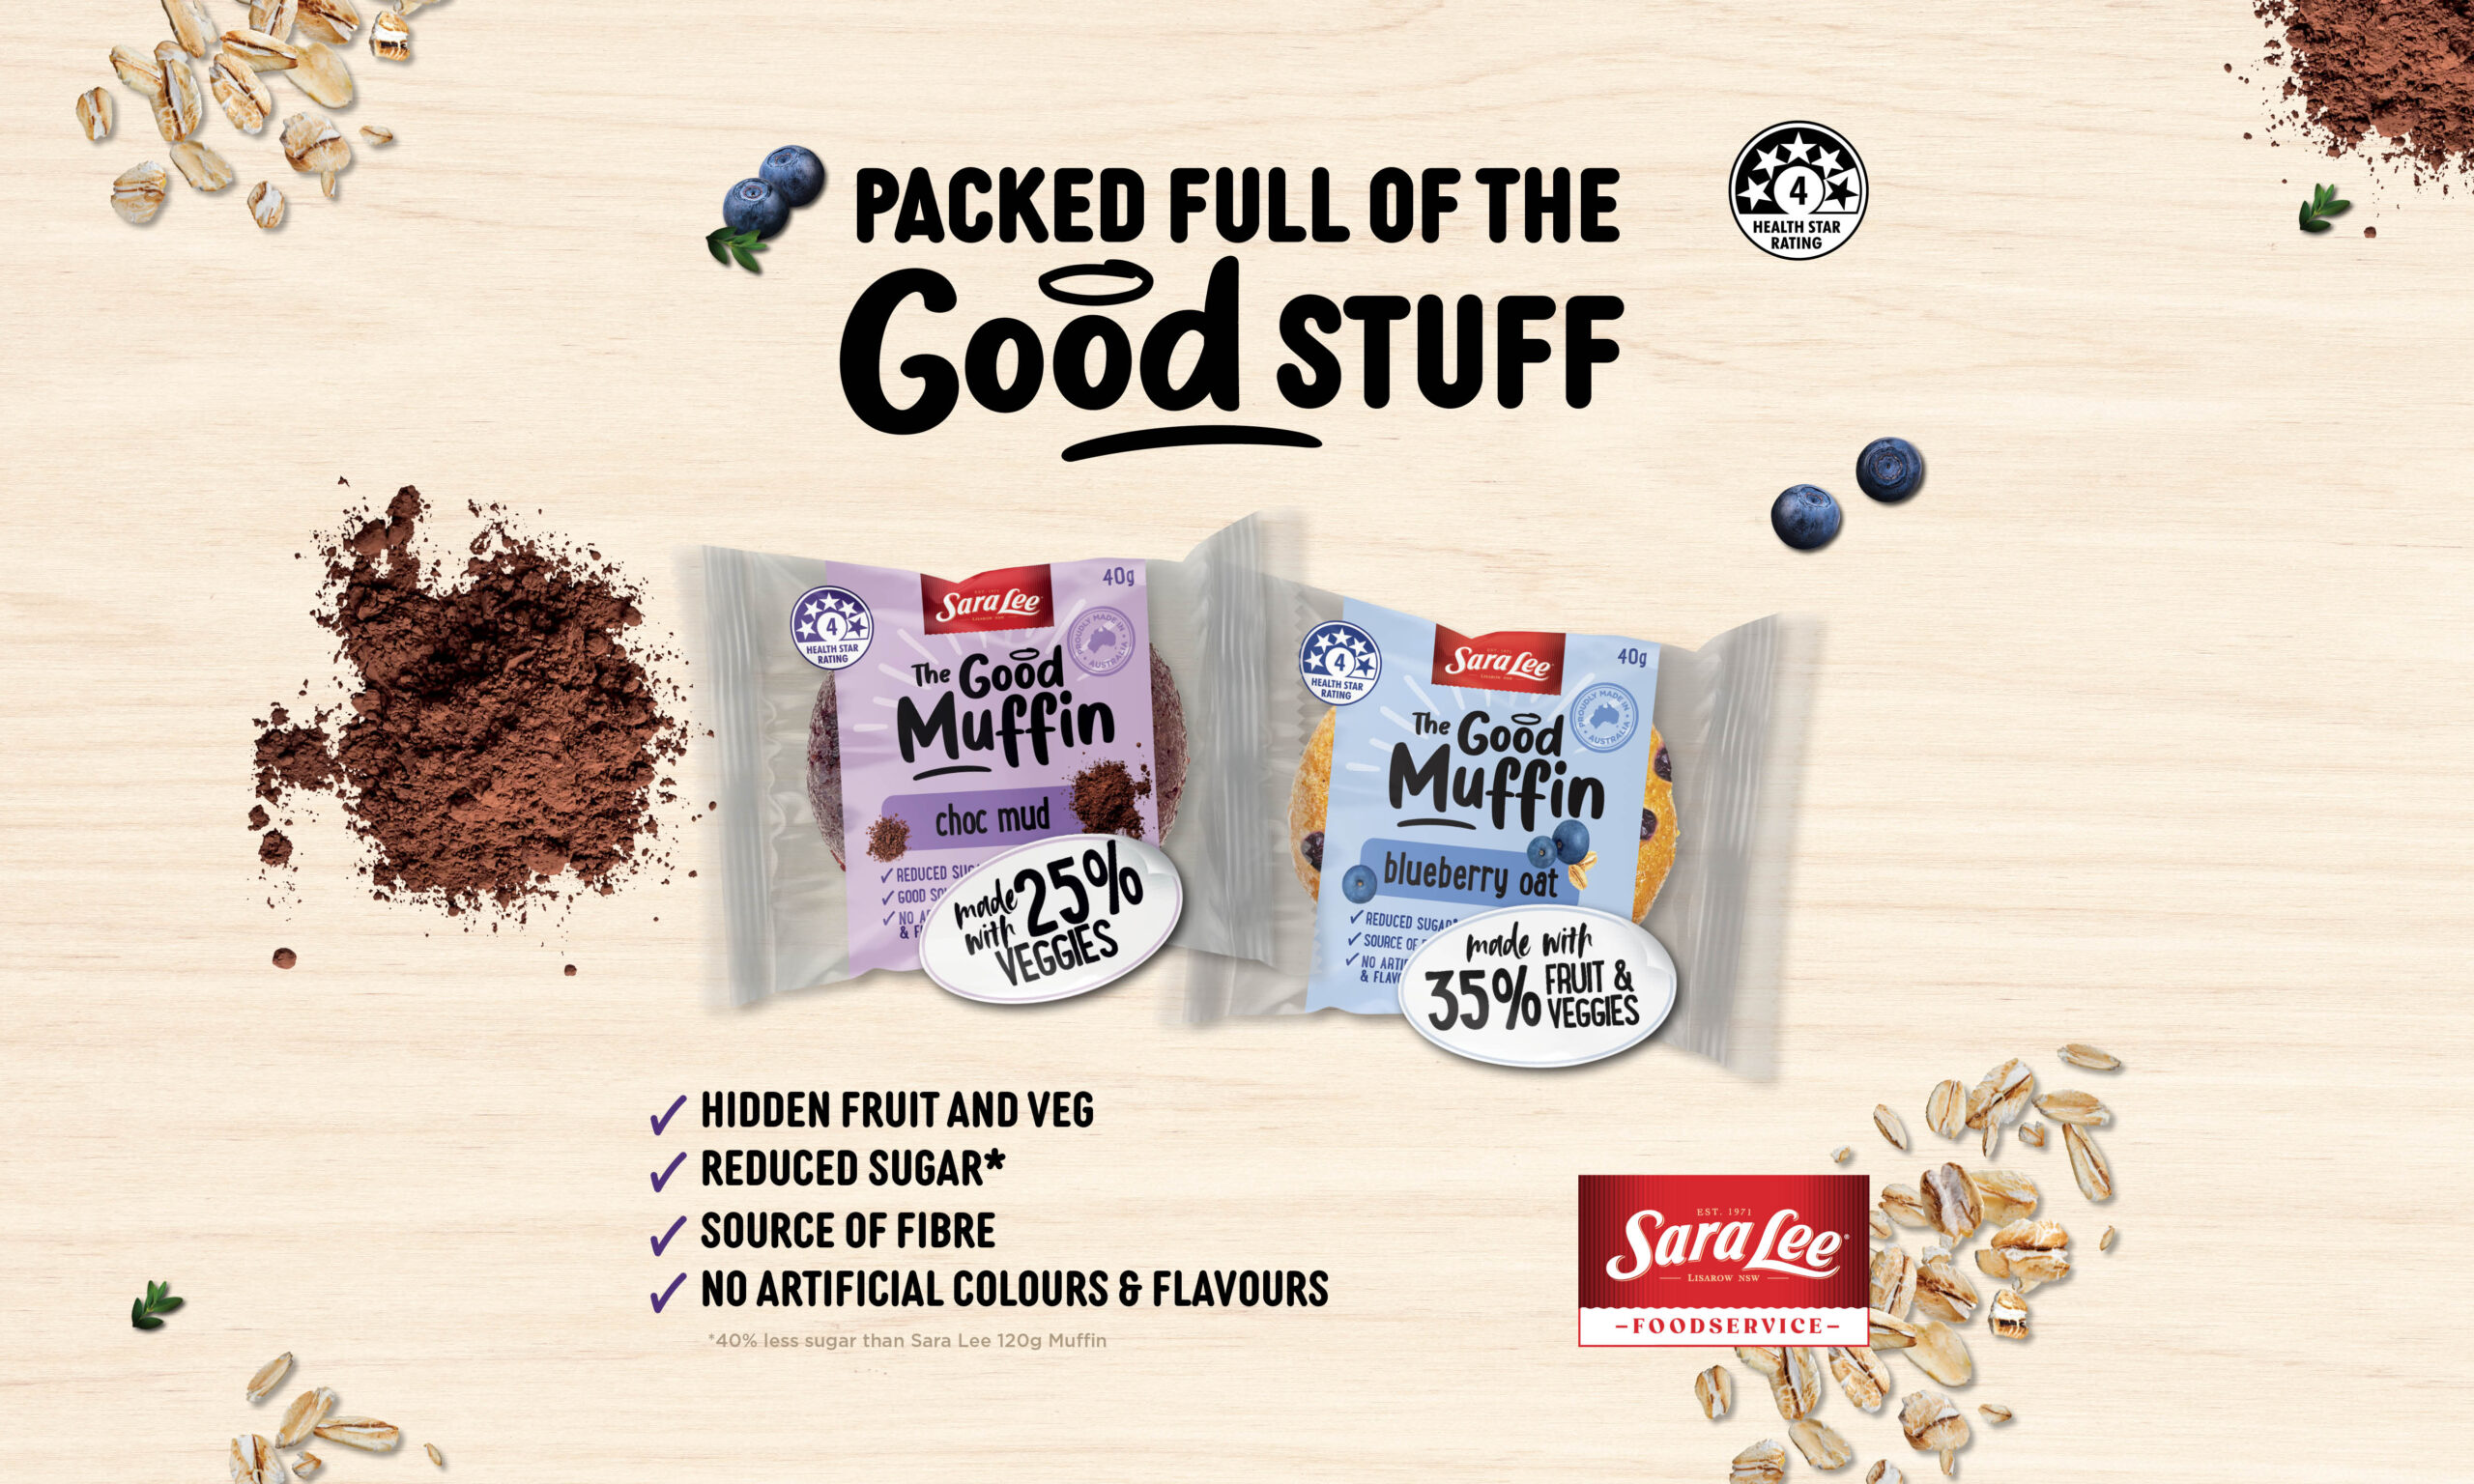 Sara Lee introduces The Good Muffin